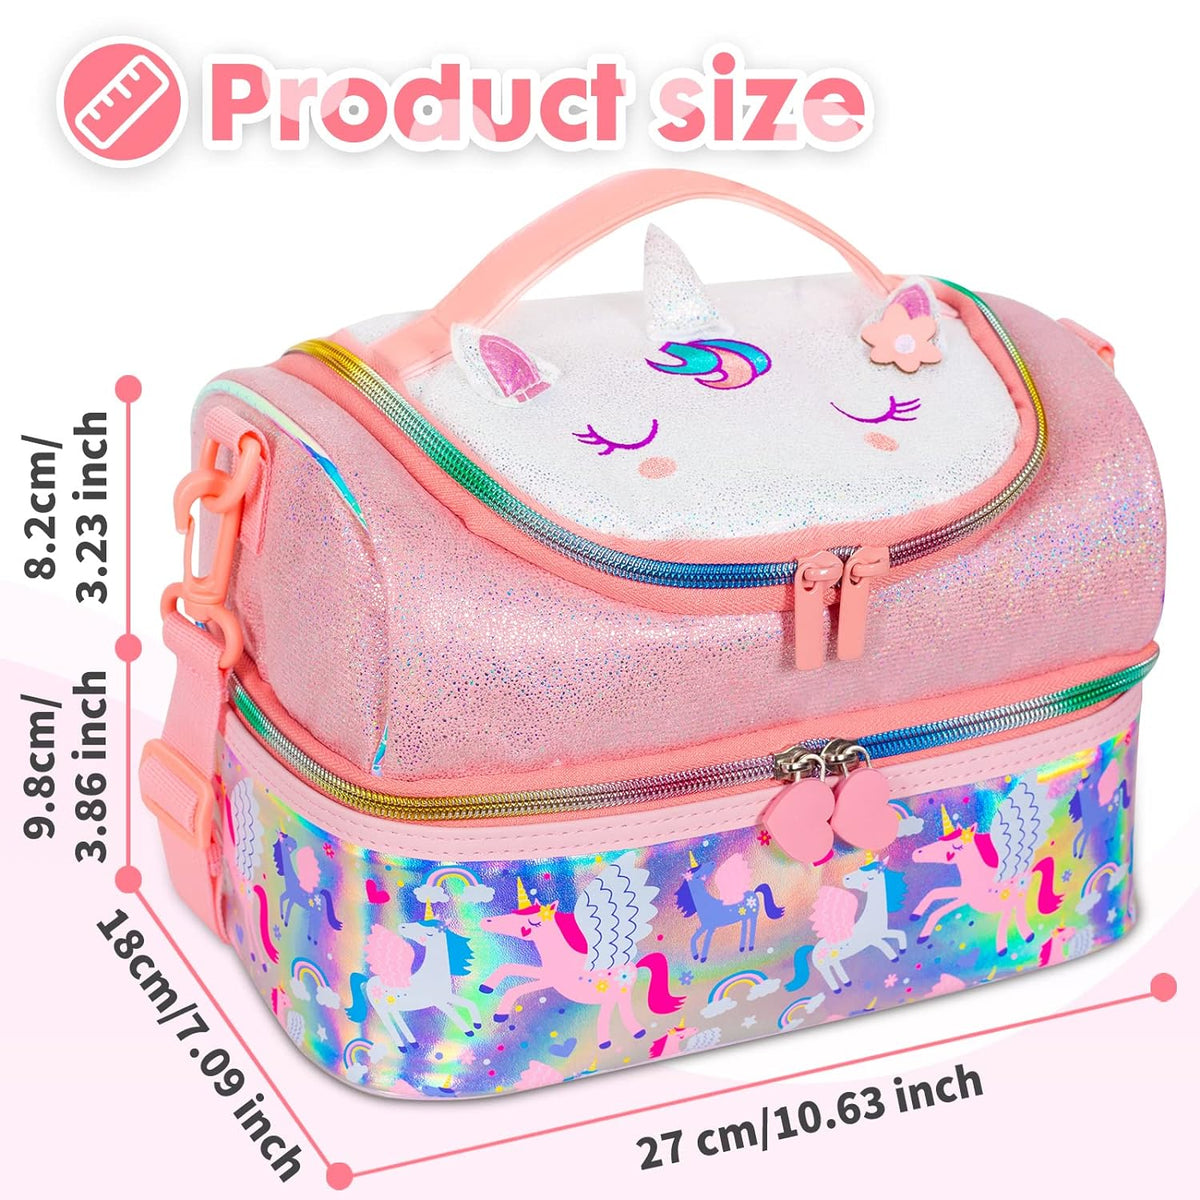 Kids Double Decker Cooler Insulated Lunch Bag Large Tote for Boys, Girls, Men, Women, with Adjustable Strap, Unicorn